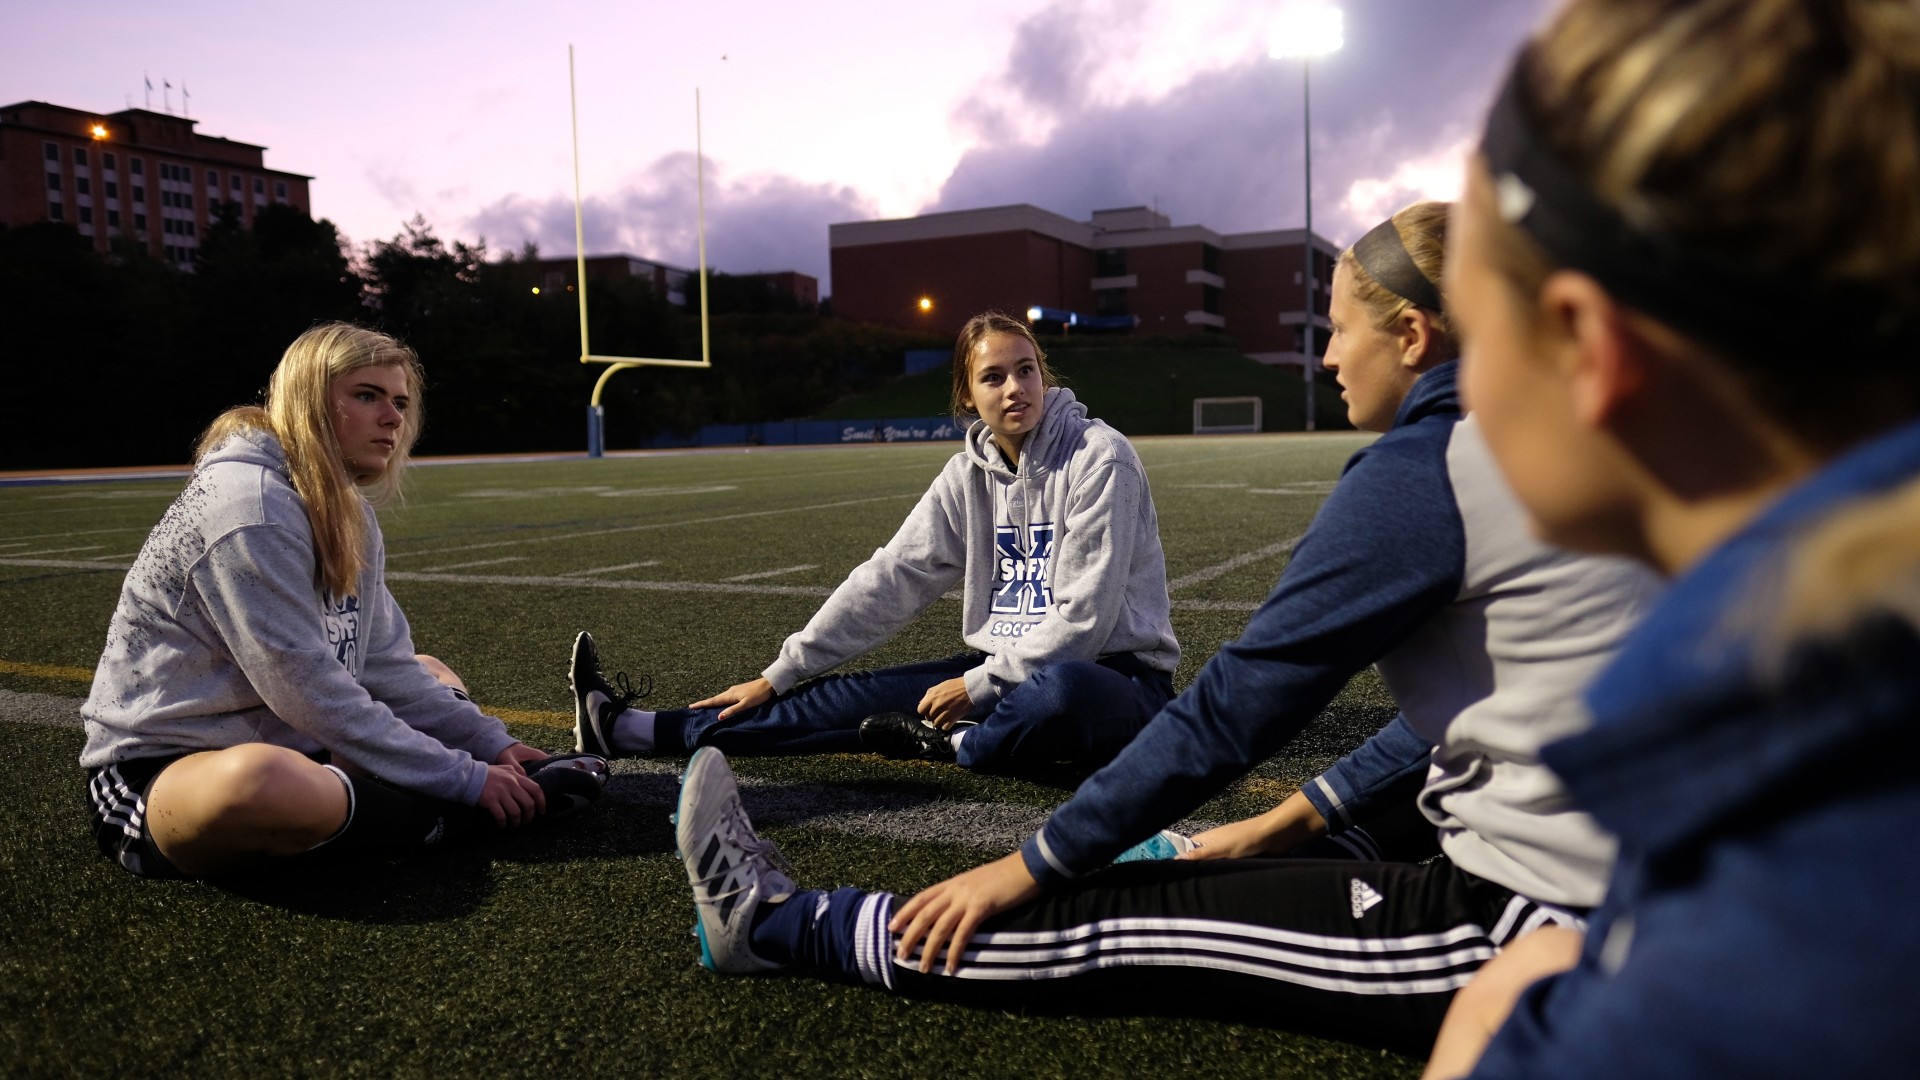 Students sitting on the football field turf to stretch during sunset.